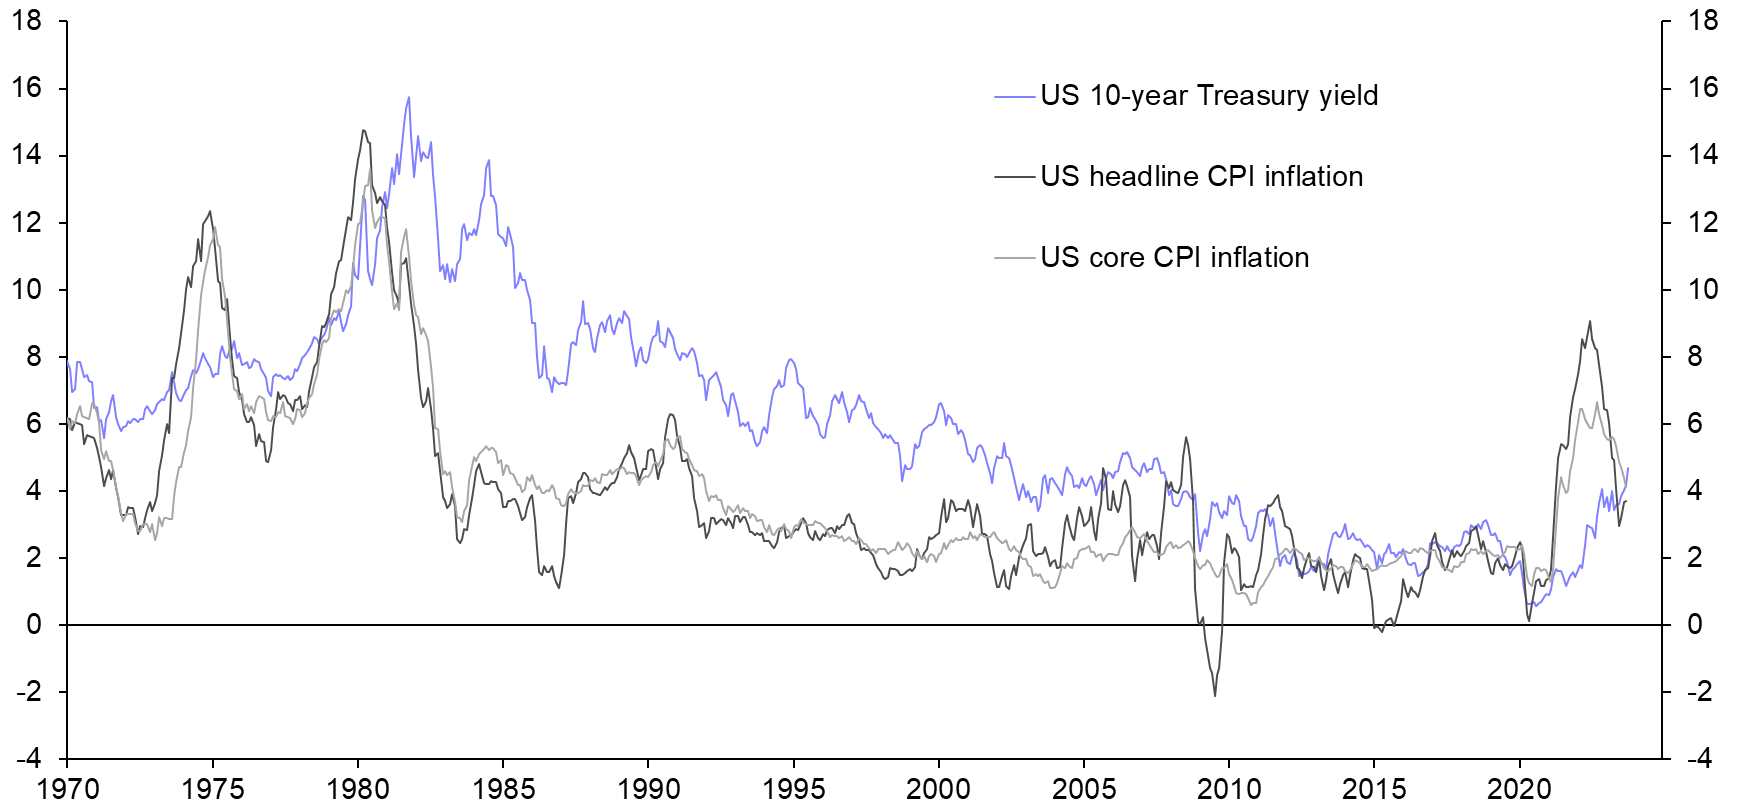 Will falling inflation ultimately push US Treasury yields down?
